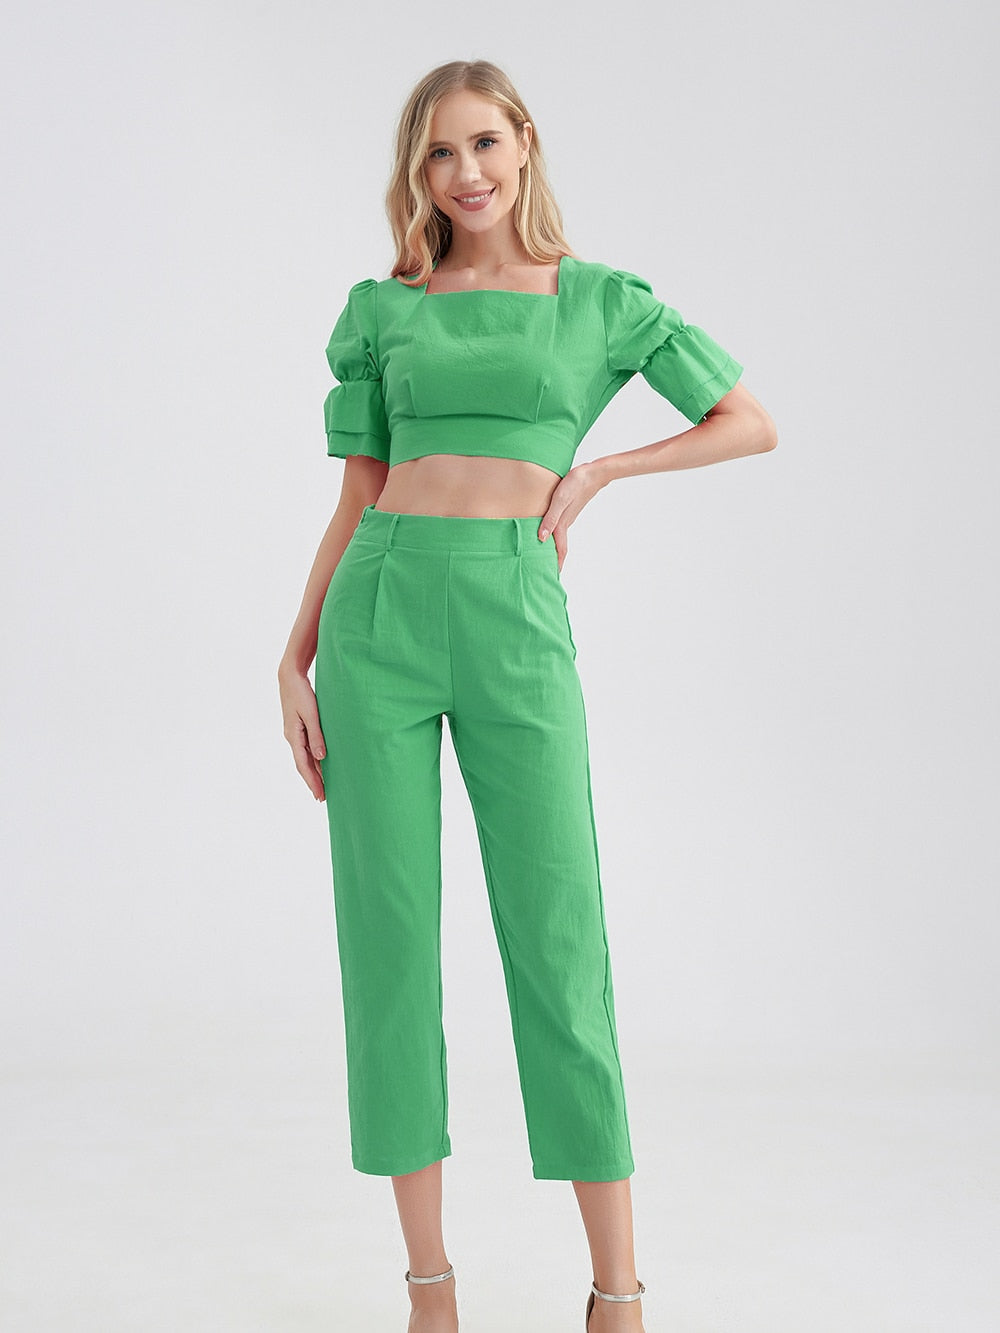 Stylish Cotton Crop Top Set With Ruffles